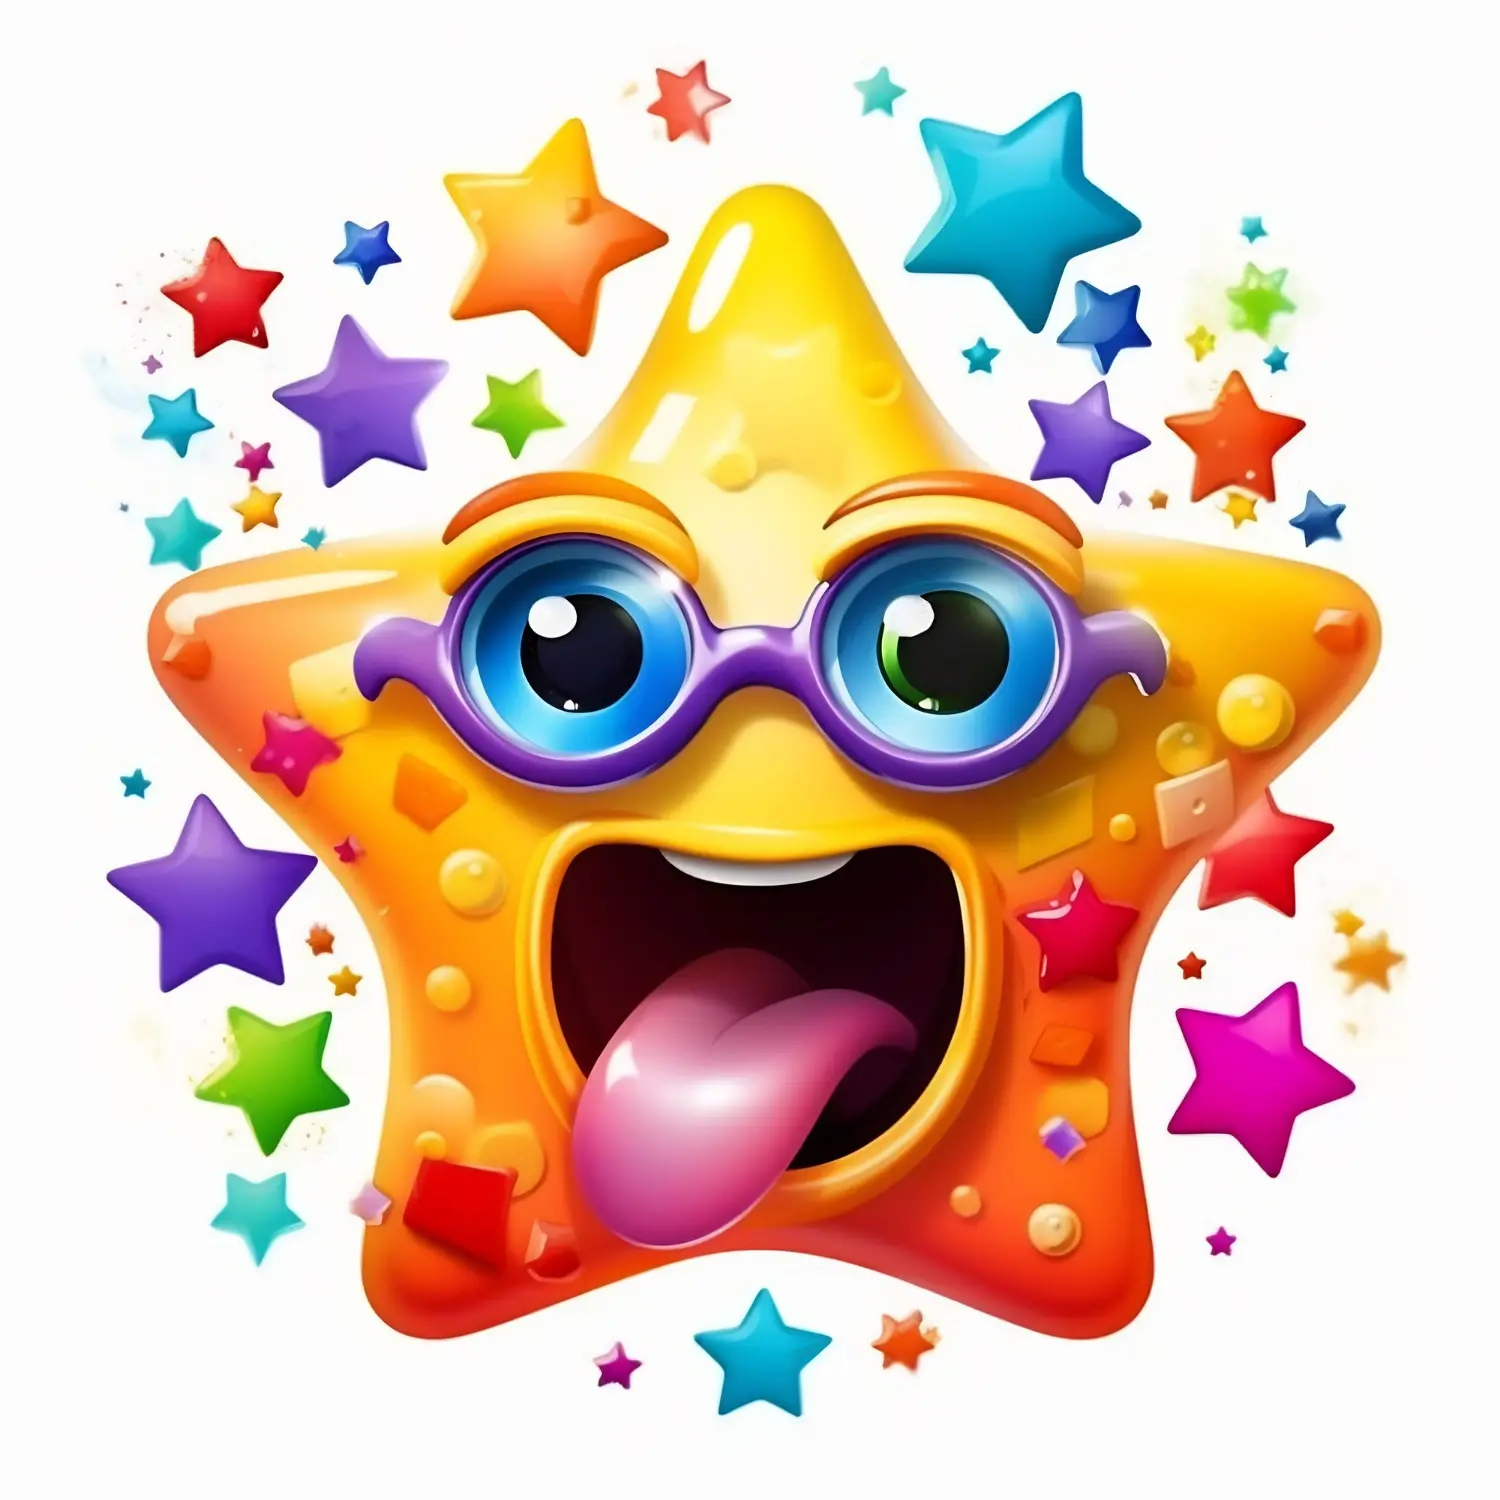 Cute star character with joyful emotions